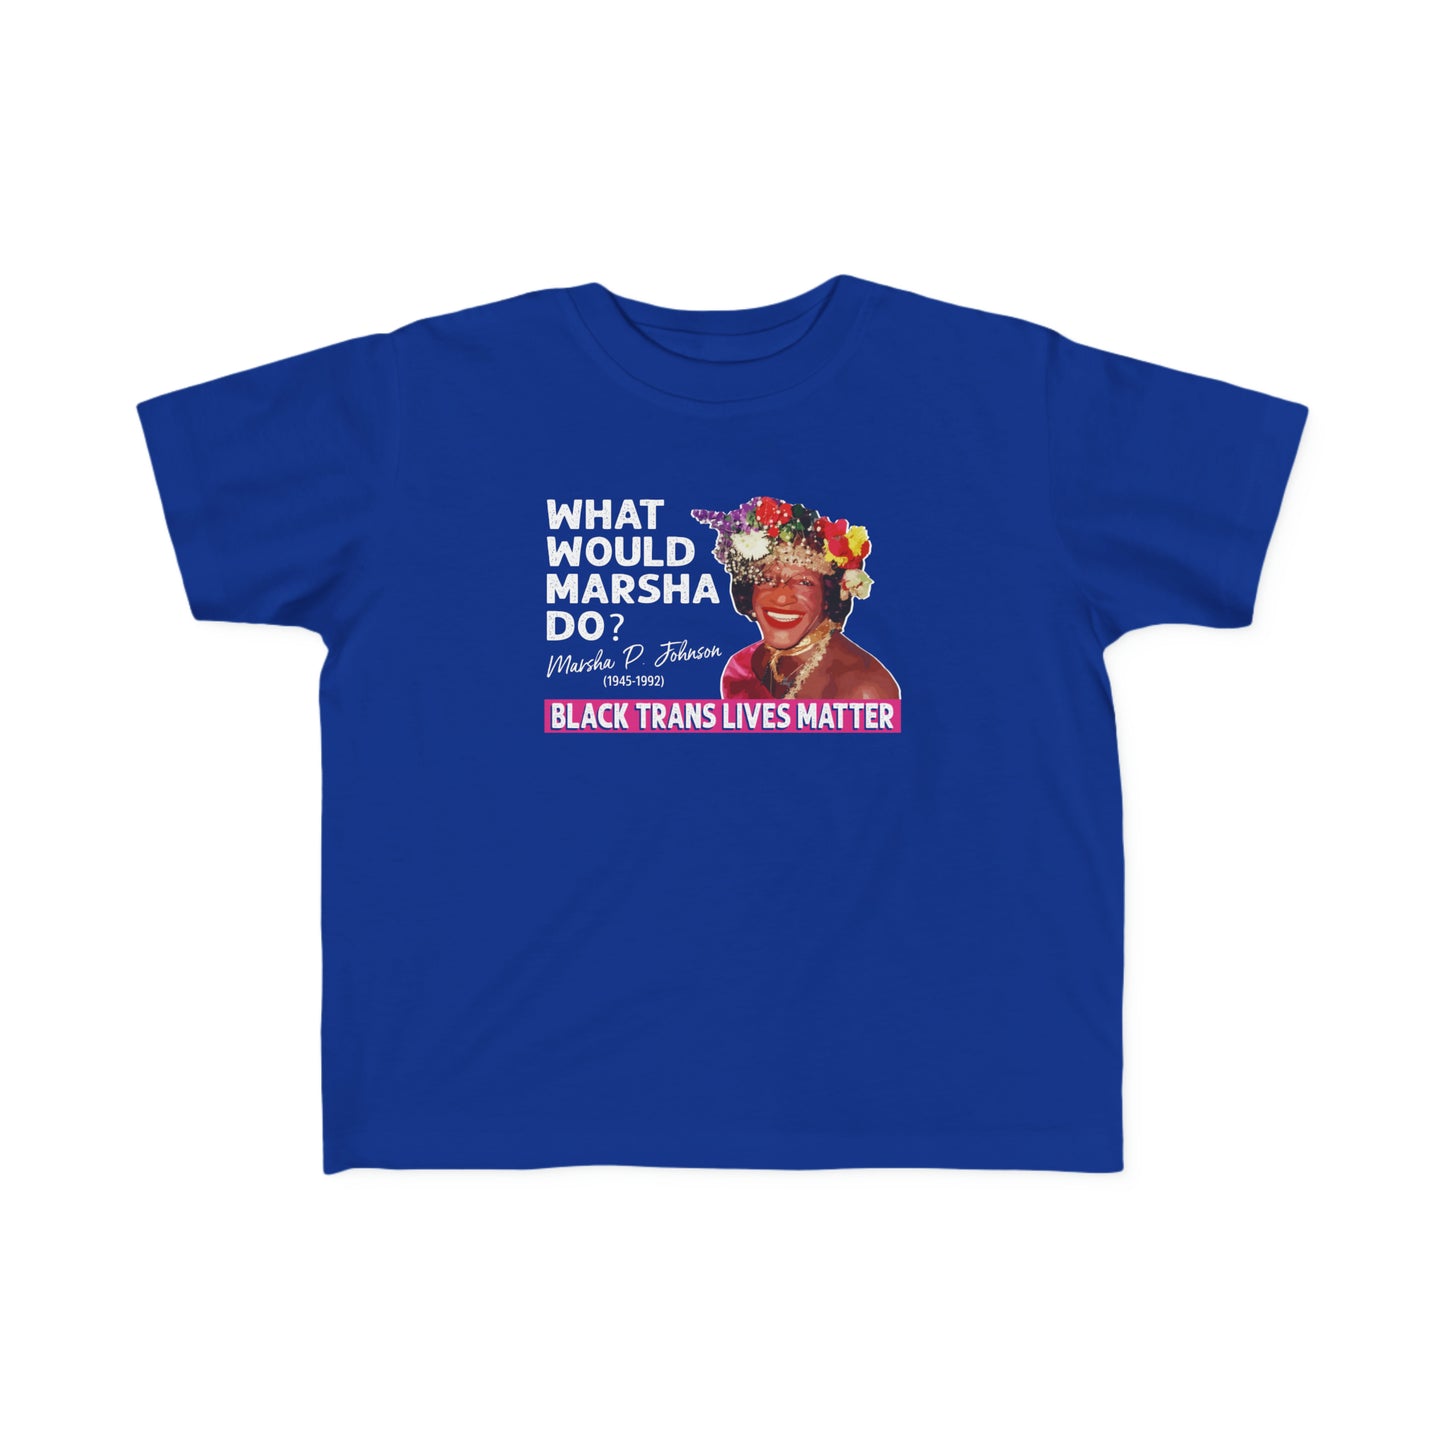 “What Would Marsha Do?” Toddler's Tee